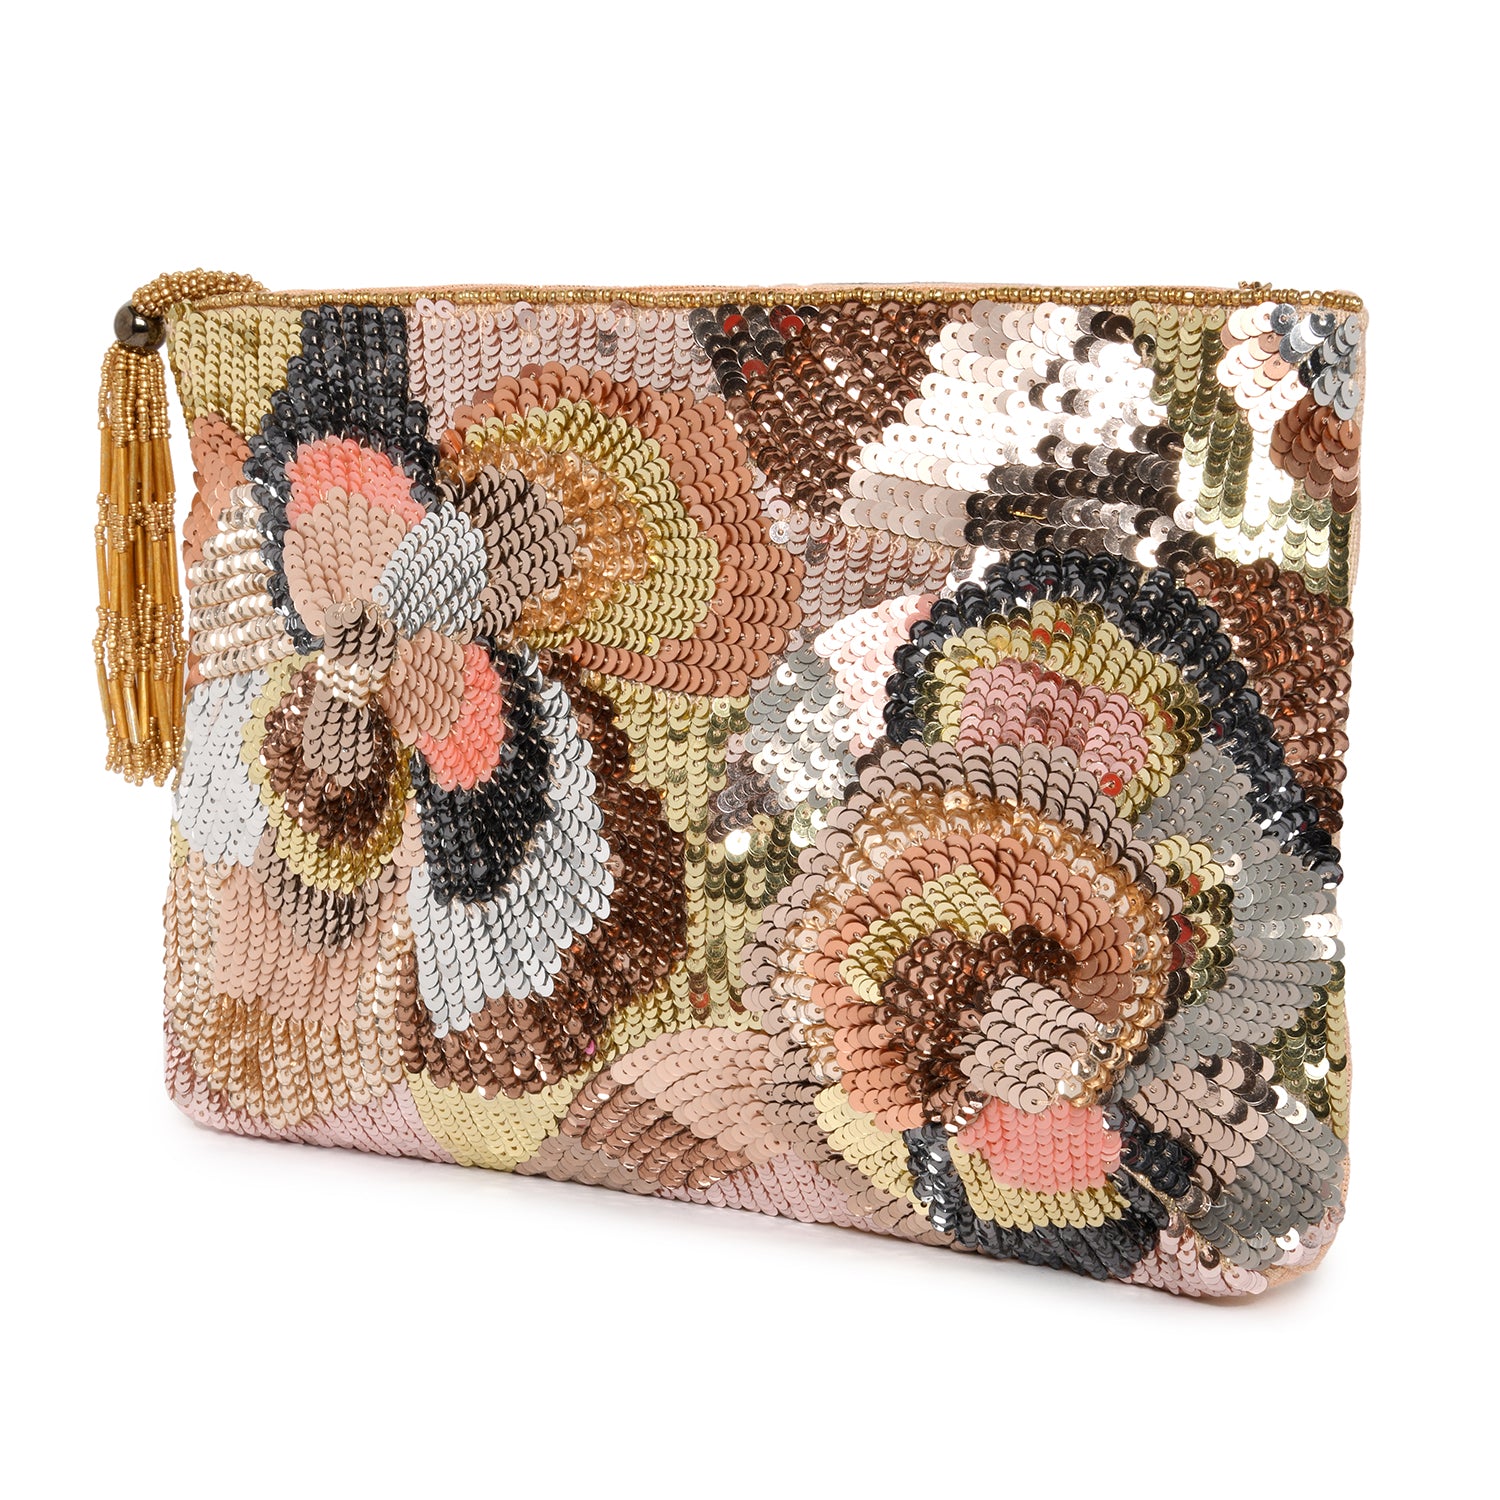 Accessorize London Women's Seraphina sequins Embellished Zip Top Party Clutch